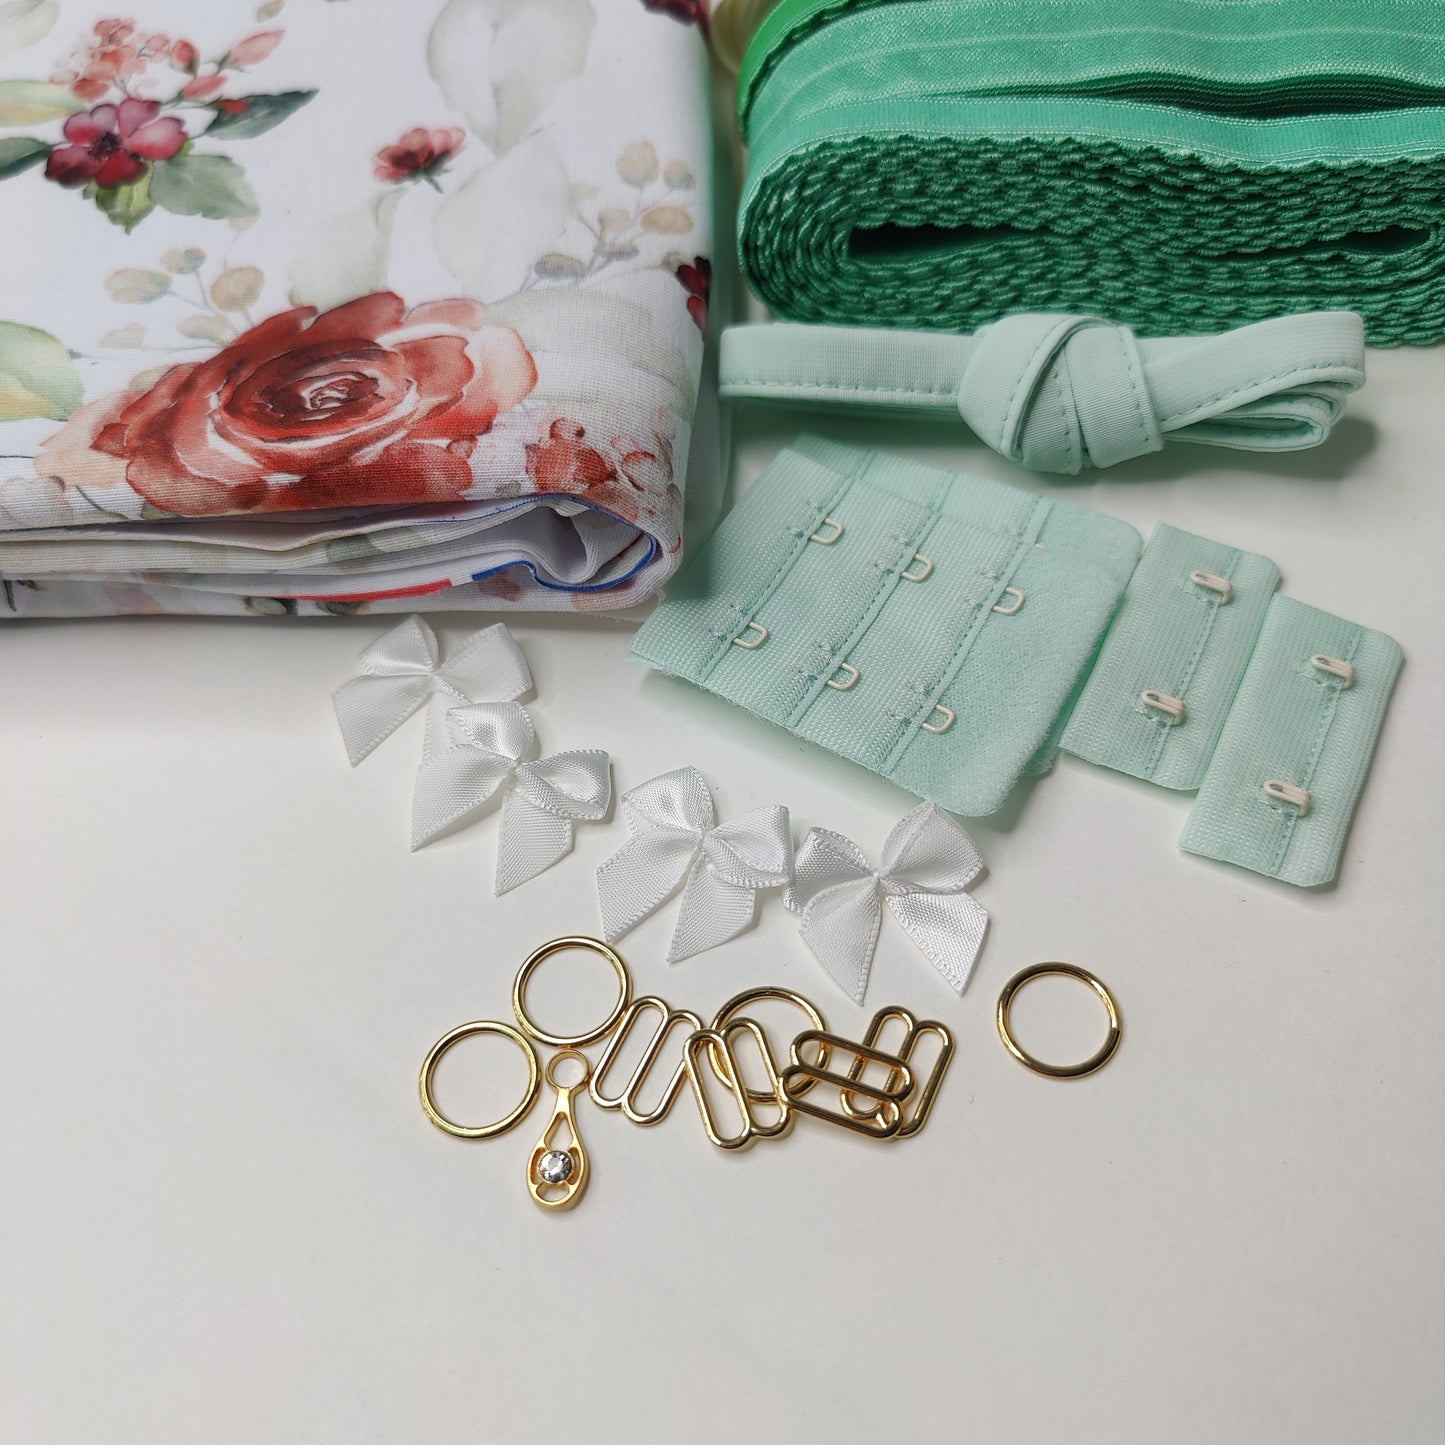 Offer of the month for May. 15% discount will be charged upon checkout. Large sewing set for 2x bras and panties or sewing package with <tc>lace</tc>, microfiber and powernet in green with flowers. IDnsx1